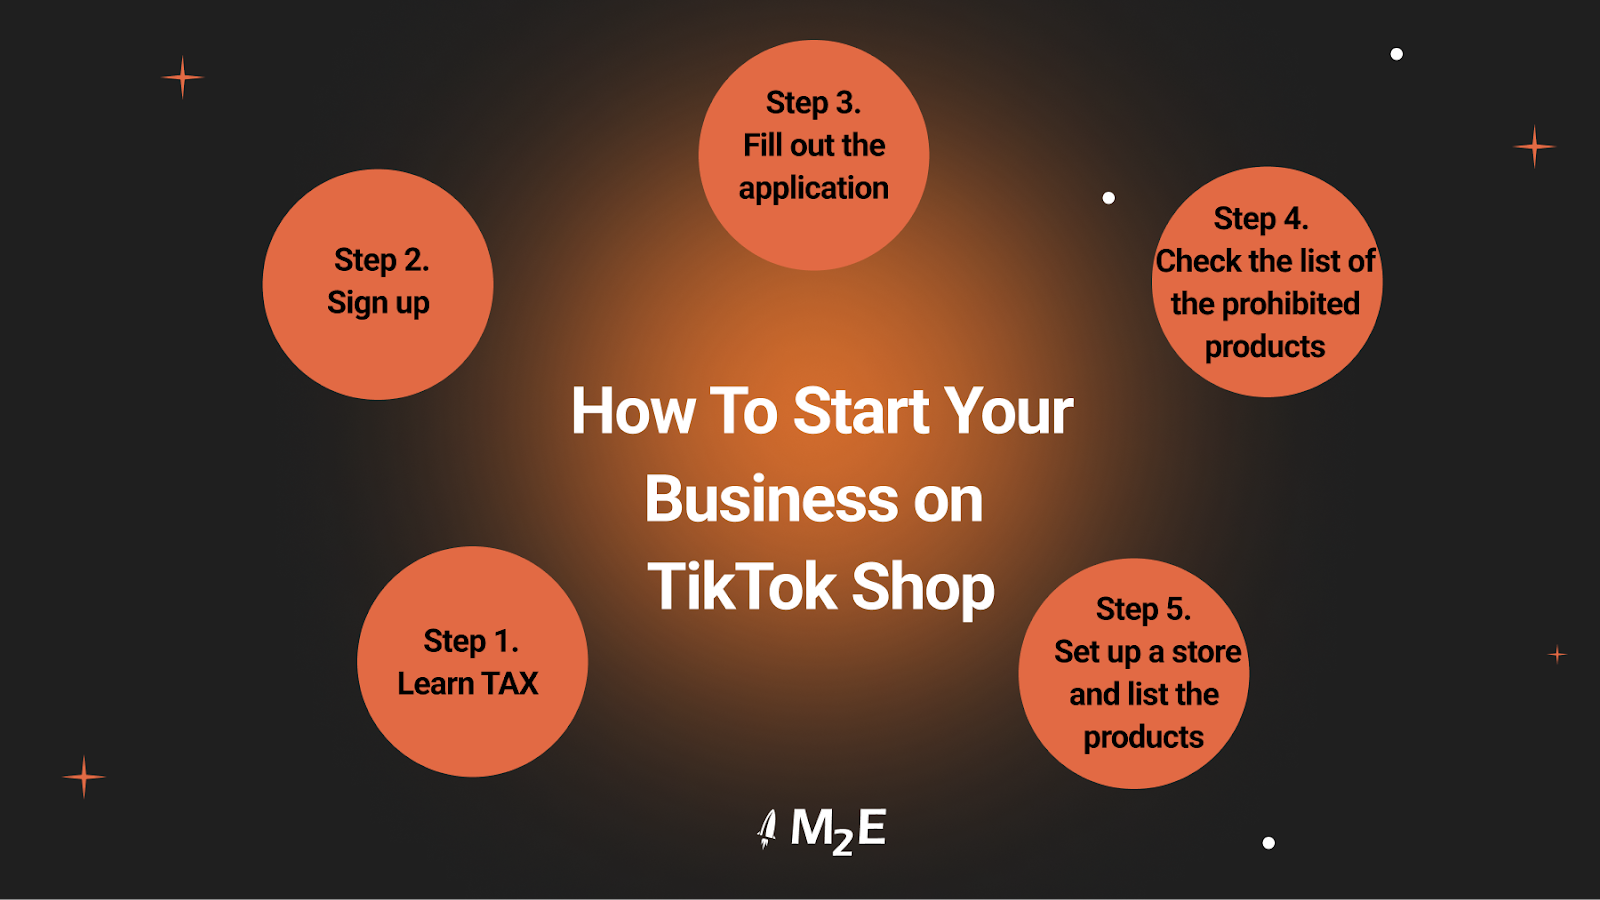 How To Start Your Business on TikTok Shop